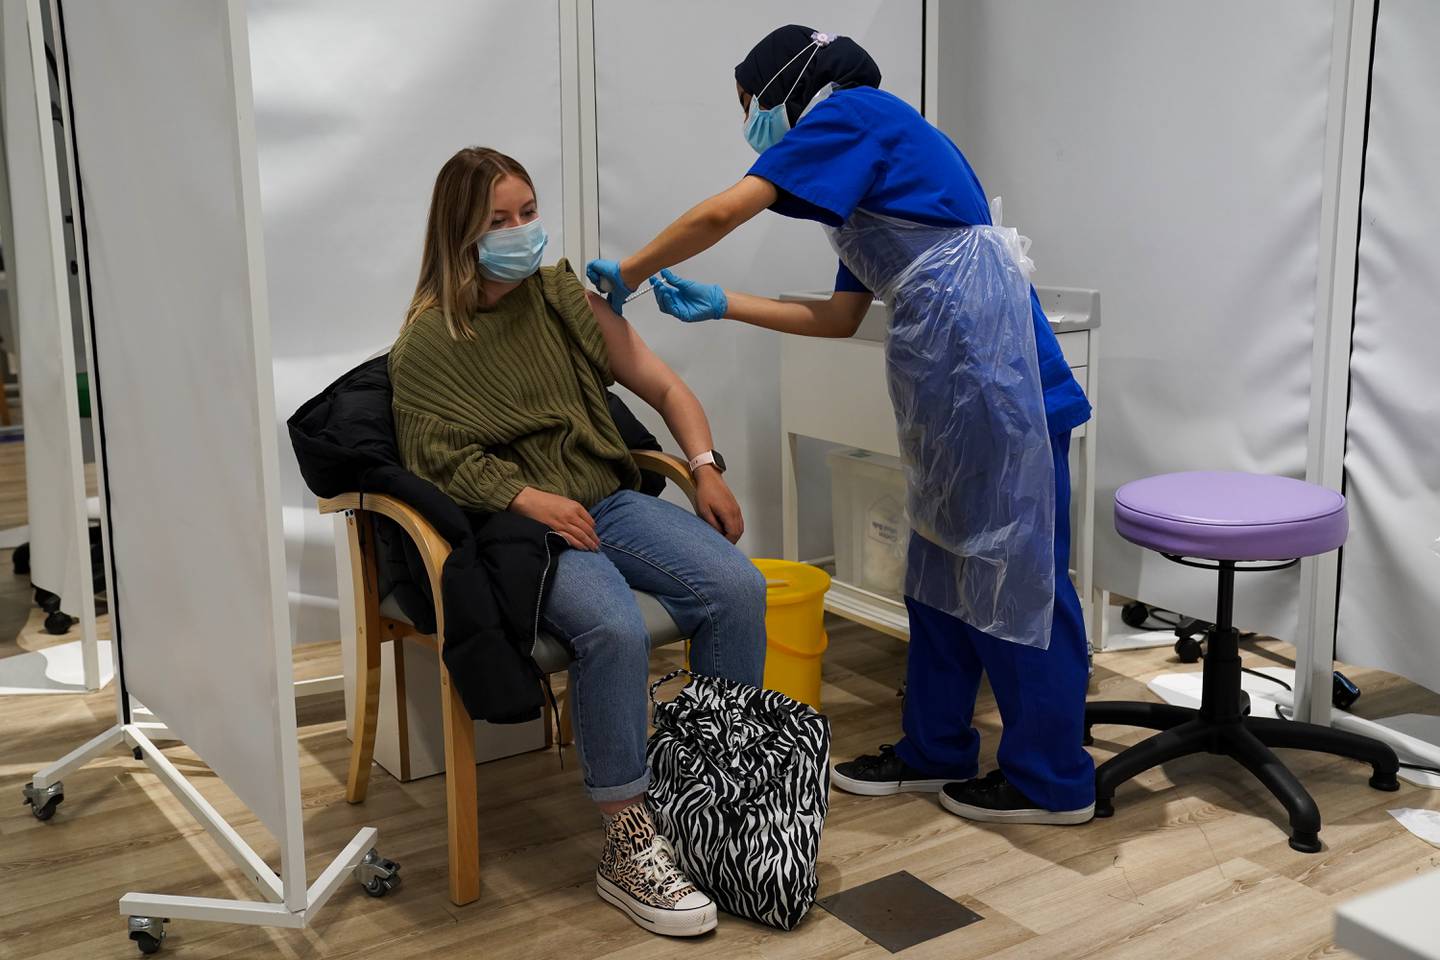 A person receives a Covid-19 Pfizer jab at a pop-up vaccination centre at Westfield Stratford City shopping centre in east London, where TikTok are encouraging young Londoners to get jabbed. Picture date: Saturday October 2, 2021.